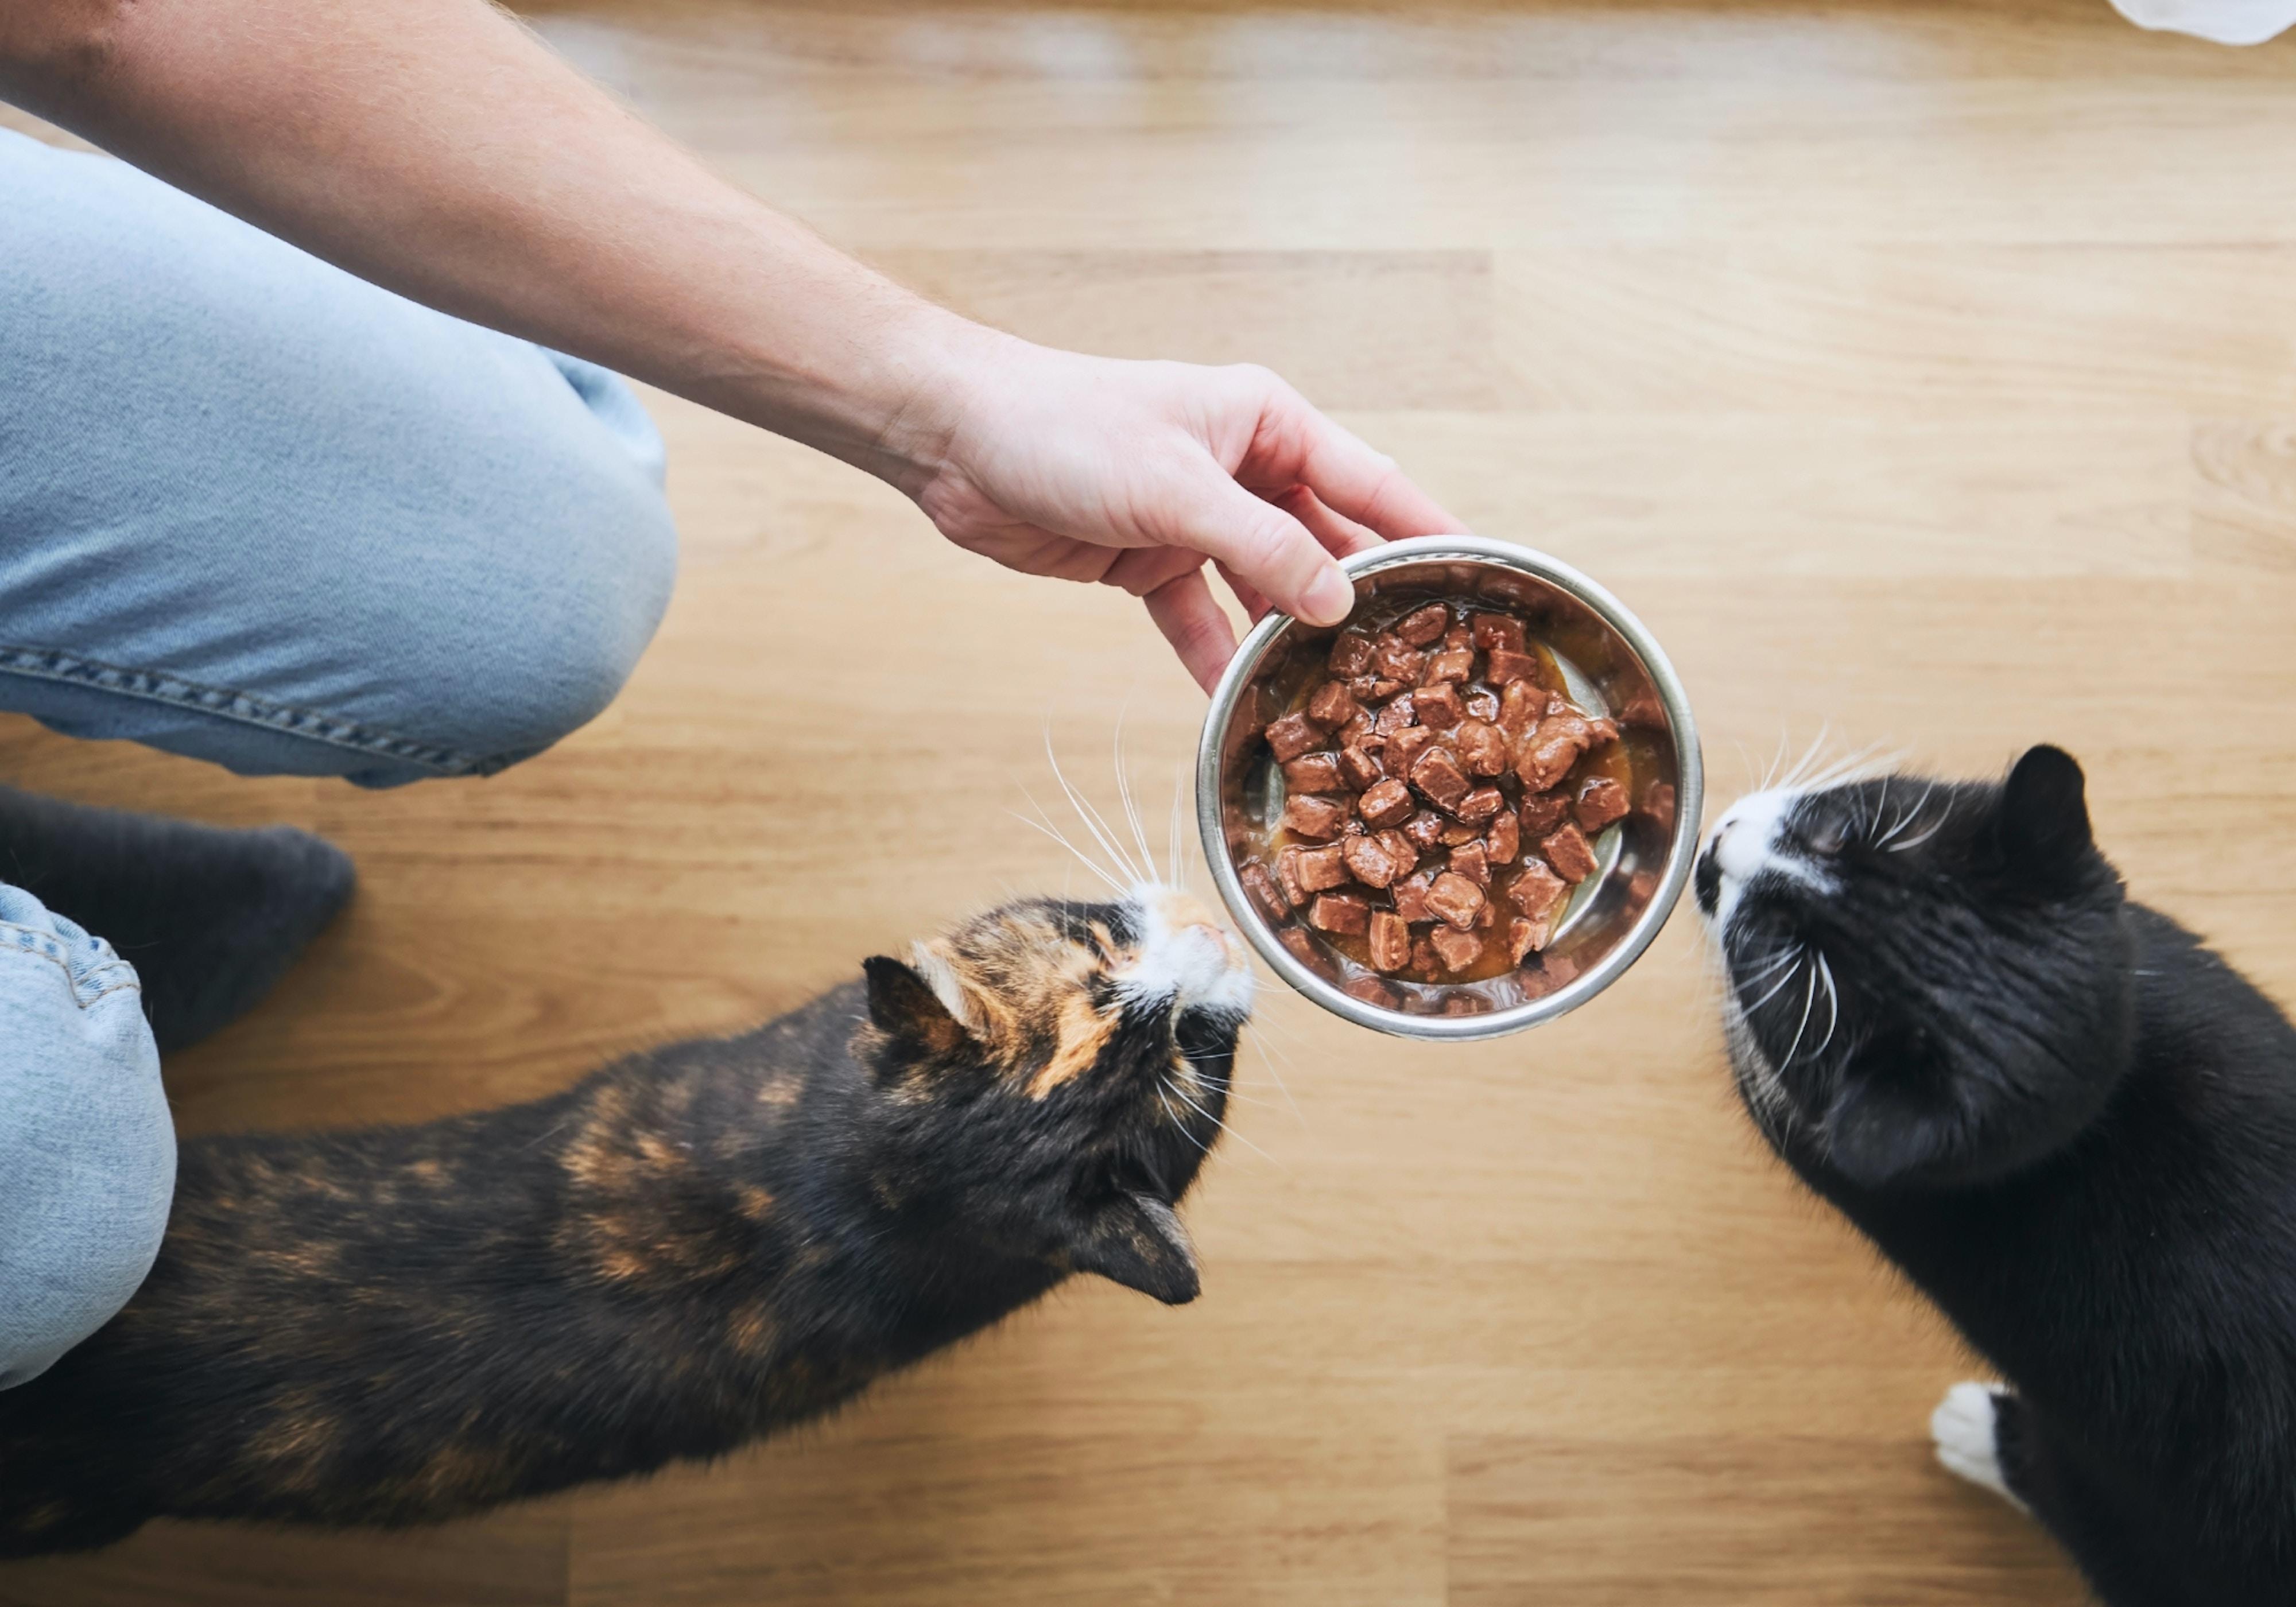 A person is kneeling on the floor and holding a bowl of cat food, and two cats are looking at the food.